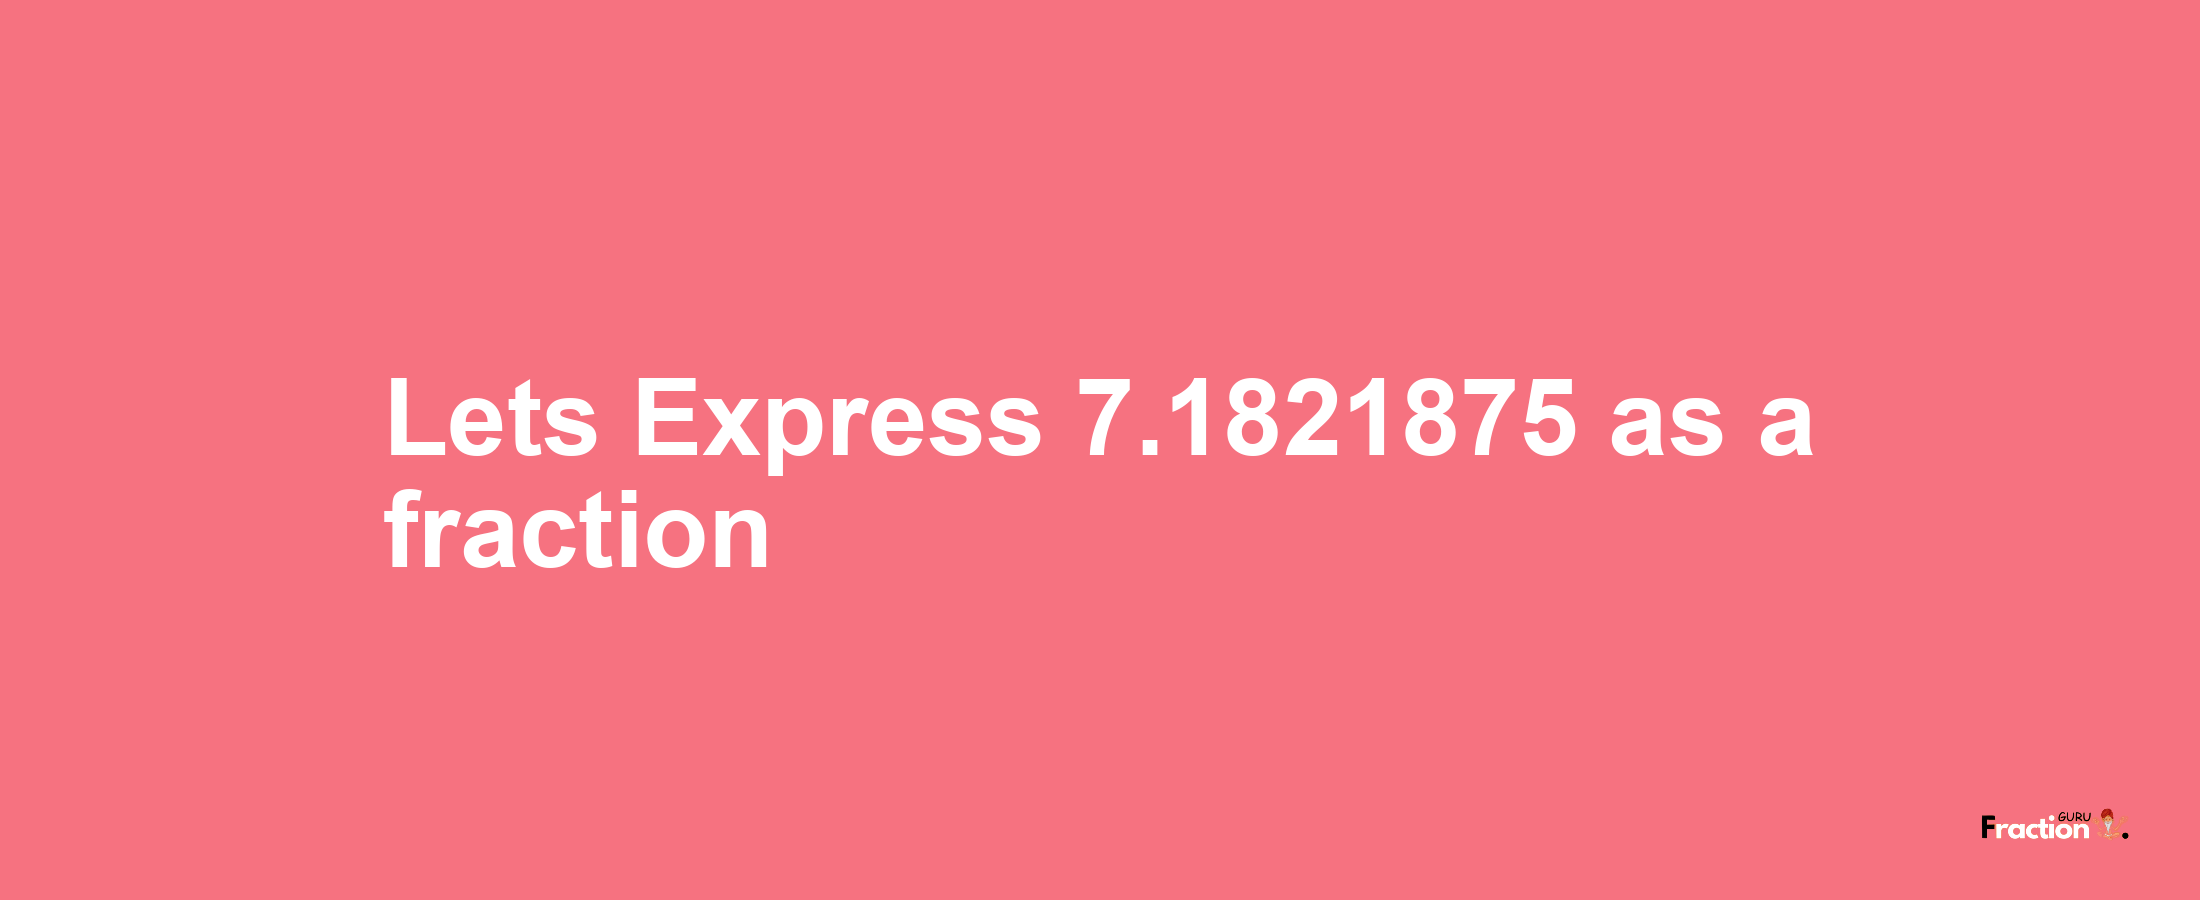 Lets Express 7.1821875 as afraction